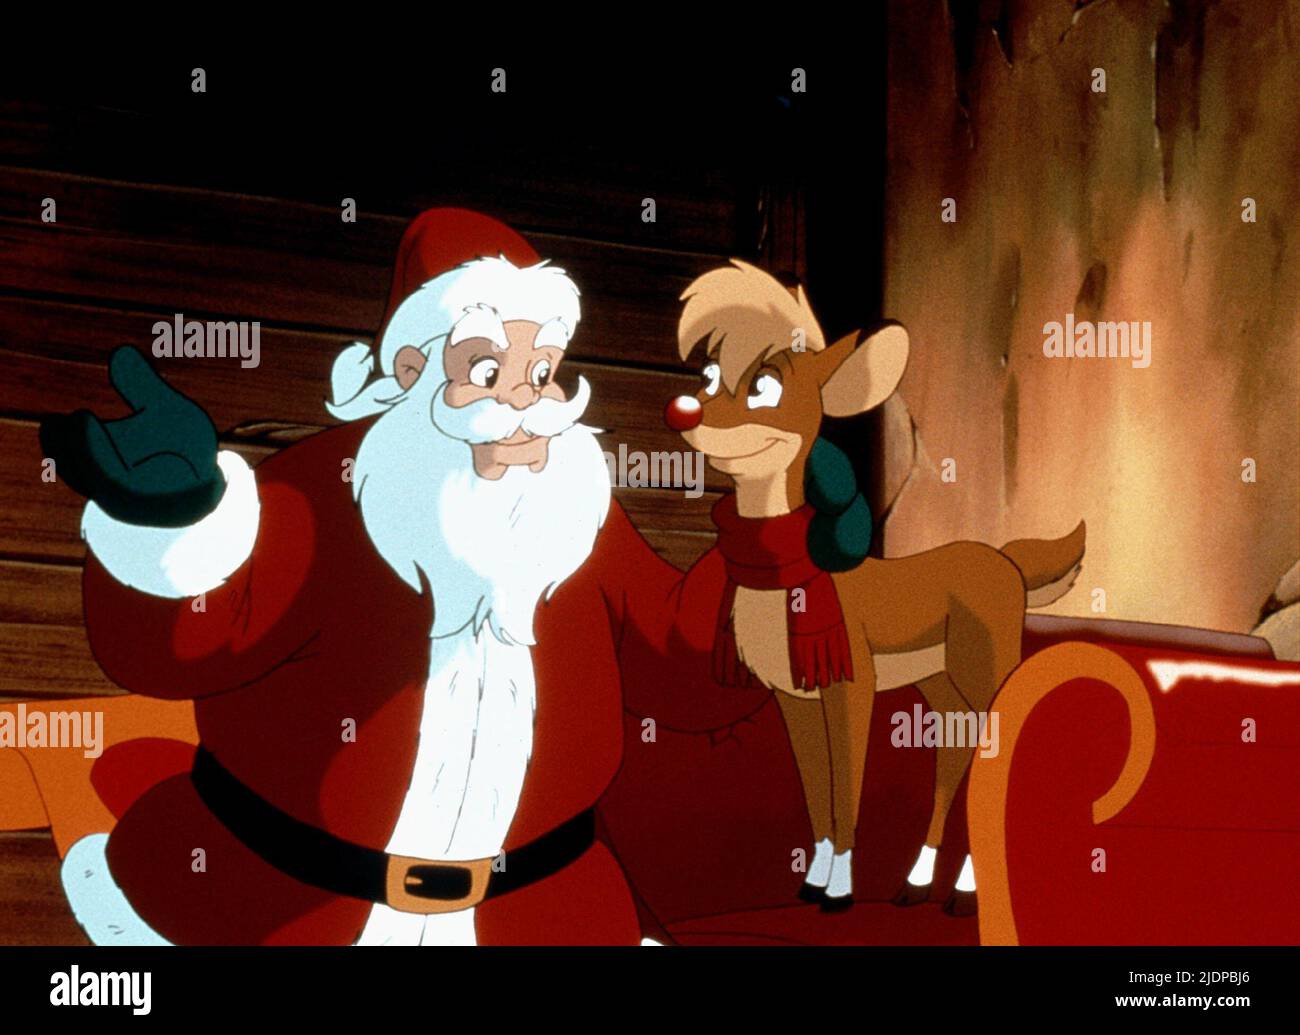 CLAUS,RUDOLPH, RUDOLPH THE RED-NOSED REINDEER, 1998 Stock Photo